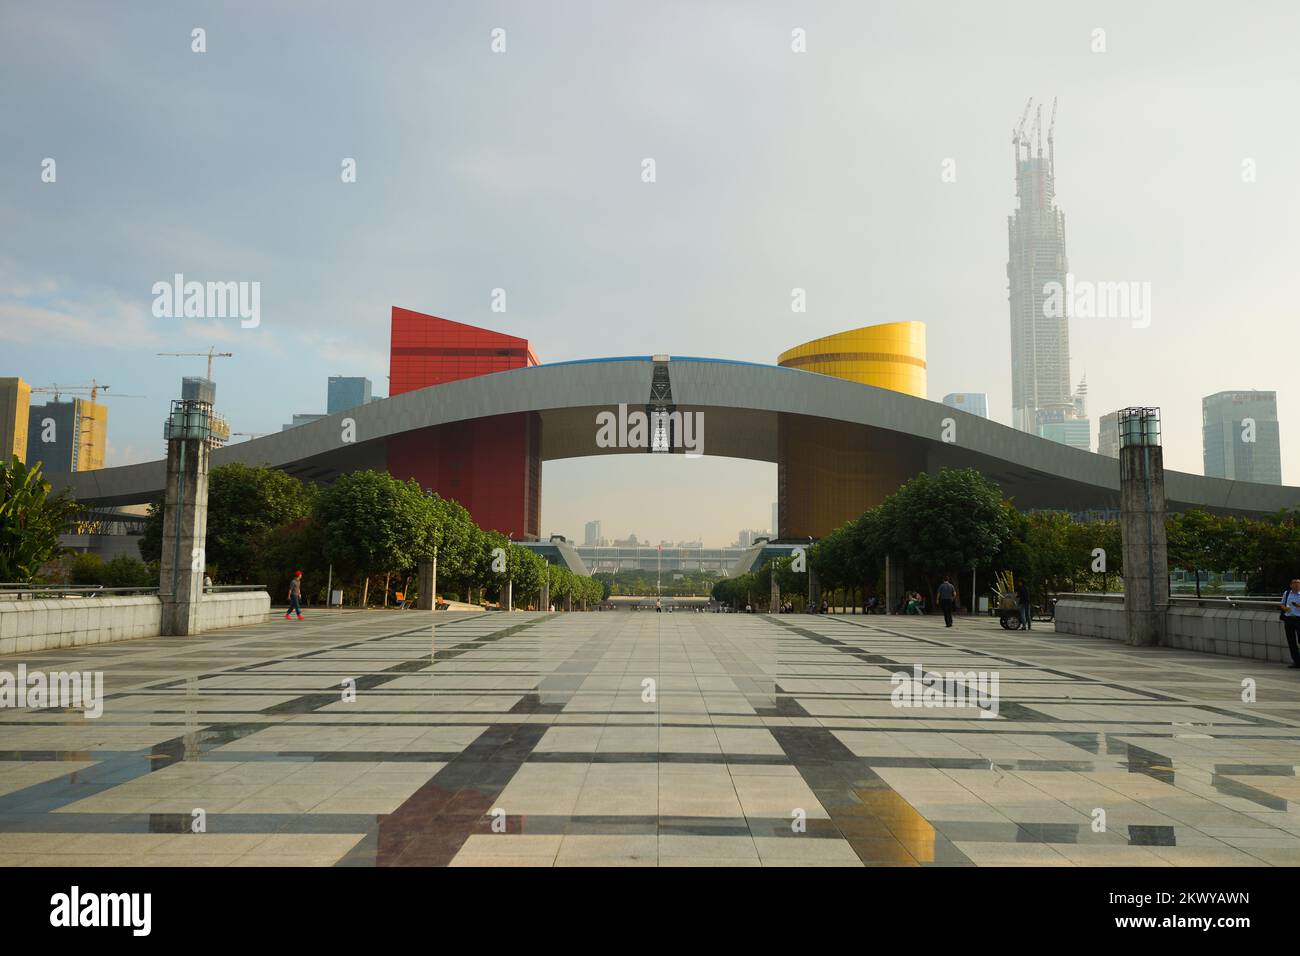 SHENZHEN - OCT 20: ShenZhen city hall on October 20, 2014 in Shenzhen, China. ShenZhen is regarded as one of the most successful Special Economic Zone Stock Photo